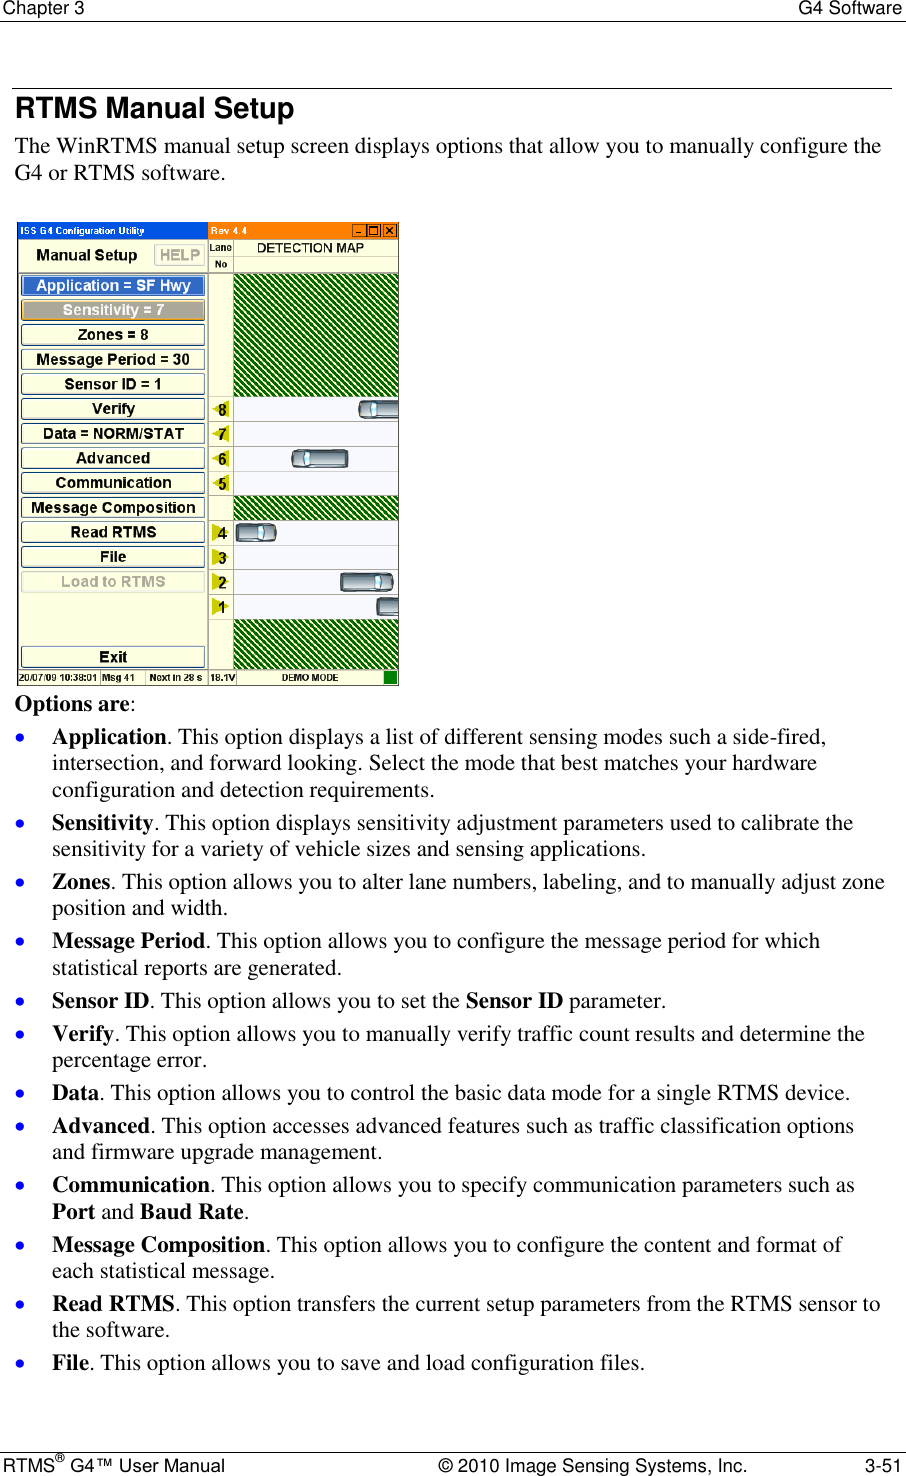 Chapter 3  G4 Software RTMS® G4™ User Manual  © 2010 Image Sensing Systems, Inc.  3-51 RTMS Manual Setup The WinRTMS manual setup screen displays options that allow you to manually configure the G4 or RTMS software.   Options are:  Application. This option displays a list of different sensing modes such a side-fired, intersection, and forward looking. Select the mode that best matches your hardware configuration and detection requirements.  Sensitivity. This option displays sensitivity adjustment parameters used to calibrate the sensitivity for a variety of vehicle sizes and sensing applications.  Zones. This option allows you to alter lane numbers, labeling, and to manually adjust zone position and width.  Message Period. This option allows you to configure the message period for which statistical reports are generated.  Sensor ID. This option allows you to set the Sensor ID parameter.  Verify. This option allows you to manually verify traffic count results and determine the percentage error.  Data. This option allows you to control the basic data mode for a single RTMS device.  Advanced. This option accesses advanced features such as traffic classification options and firmware upgrade management.  Communication. This option allows you to specify communication parameters such as Port and Baud Rate.  Message Composition. This option allows you to configure the content and format of each statistical message.  Read RTMS. This option transfers the current setup parameters from the RTMS sensor to the software.  File. This option allows you to save and load configuration files. 